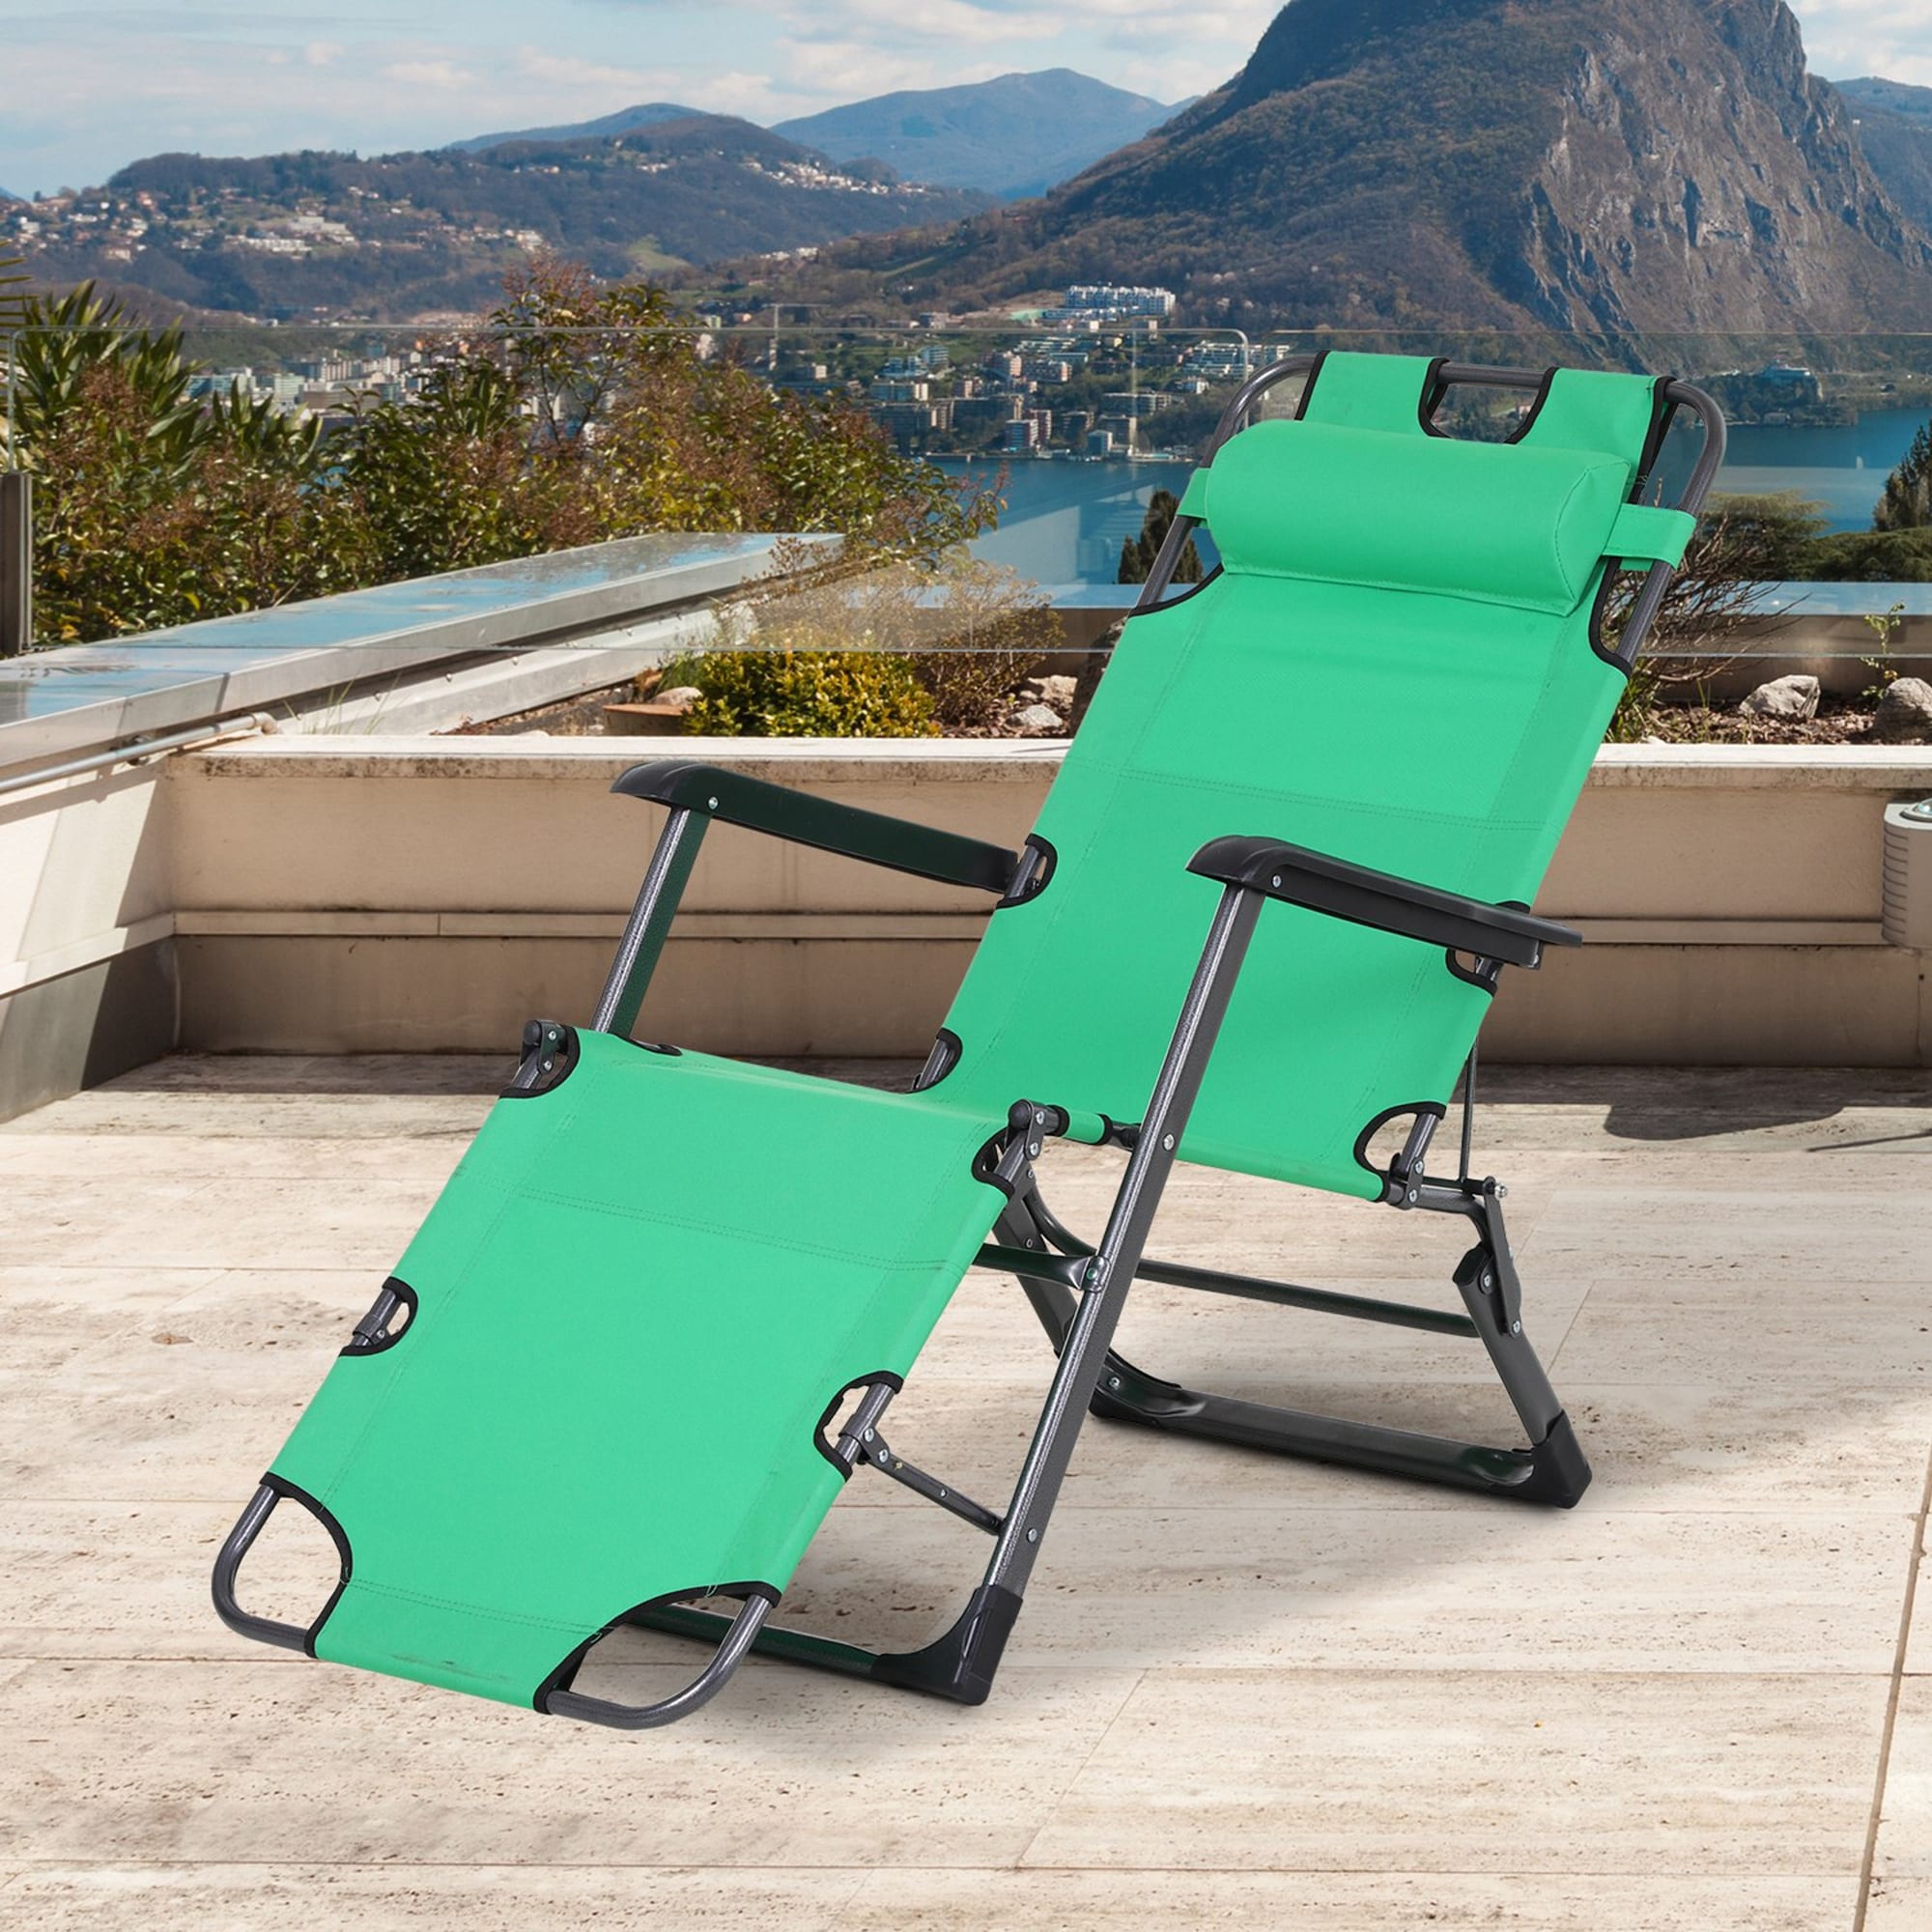 Outsunny 2-in-1 Patio Lounge Chair W/ Pillow  Outdoor Folding Sun Lounger Reclining To 120°/180°  Oxford Fabric  Green